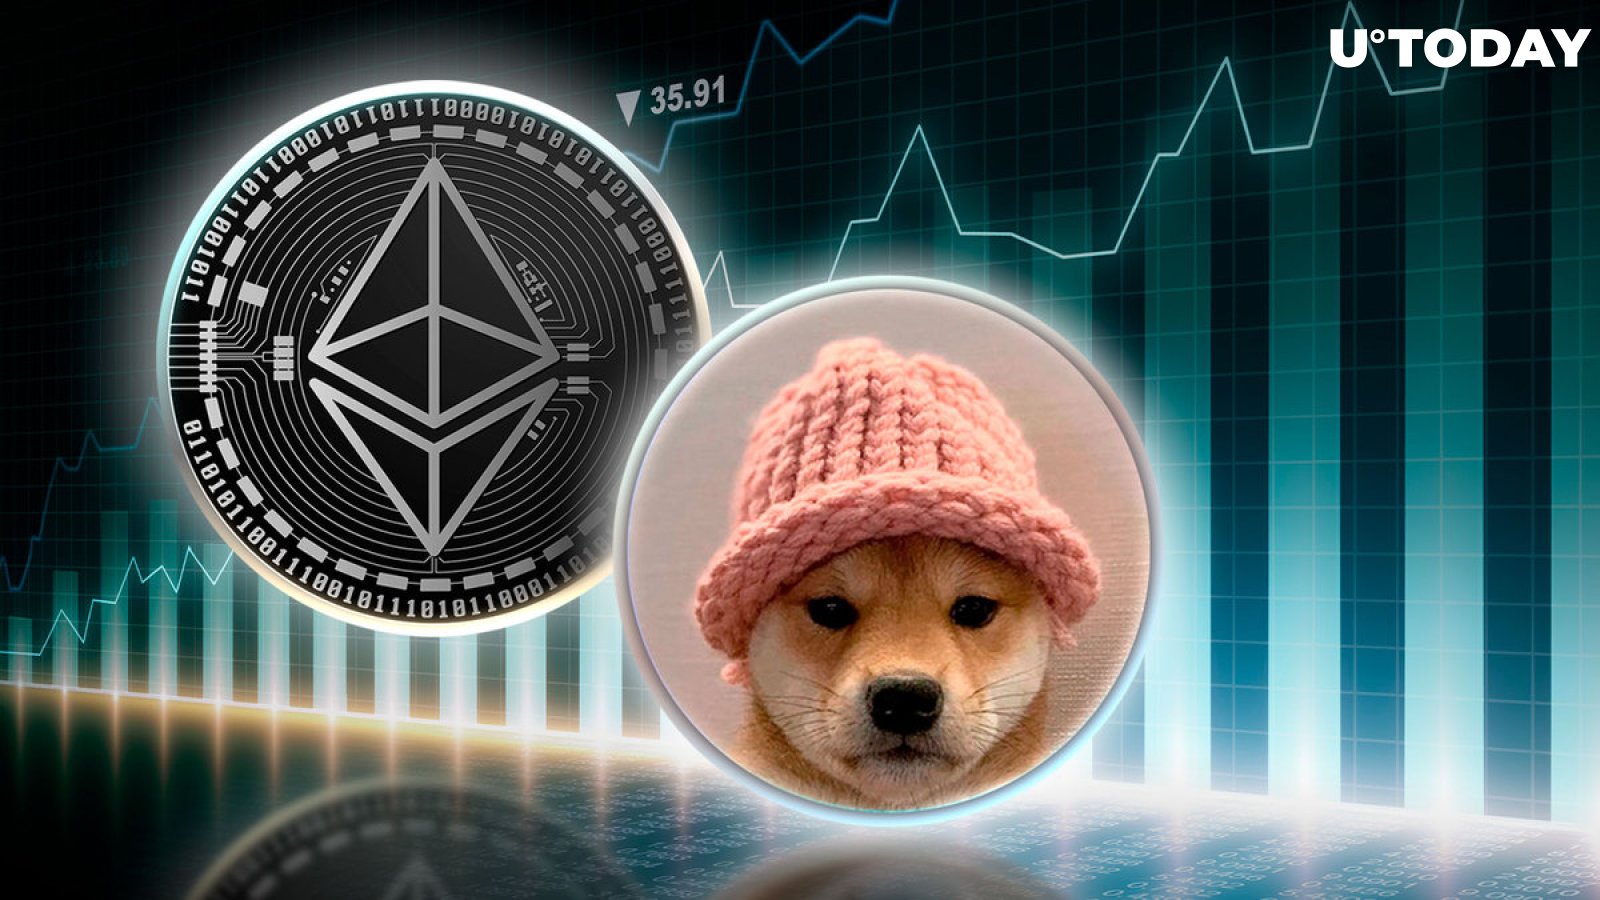 How Massive Whales Made 770 ETH on Solana’s Dogwifhat (WIF) Before Price Plunged